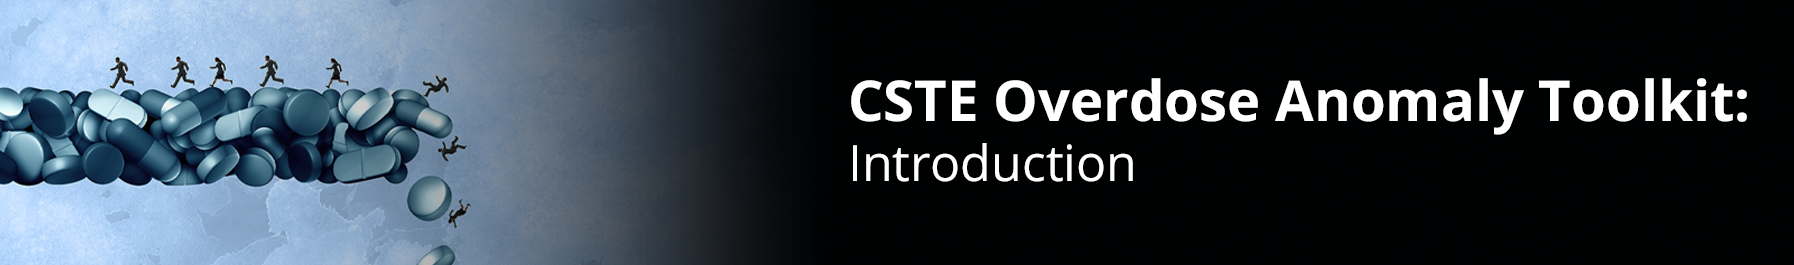 CSTE Overdose Anomaly Toolkit: Introduction